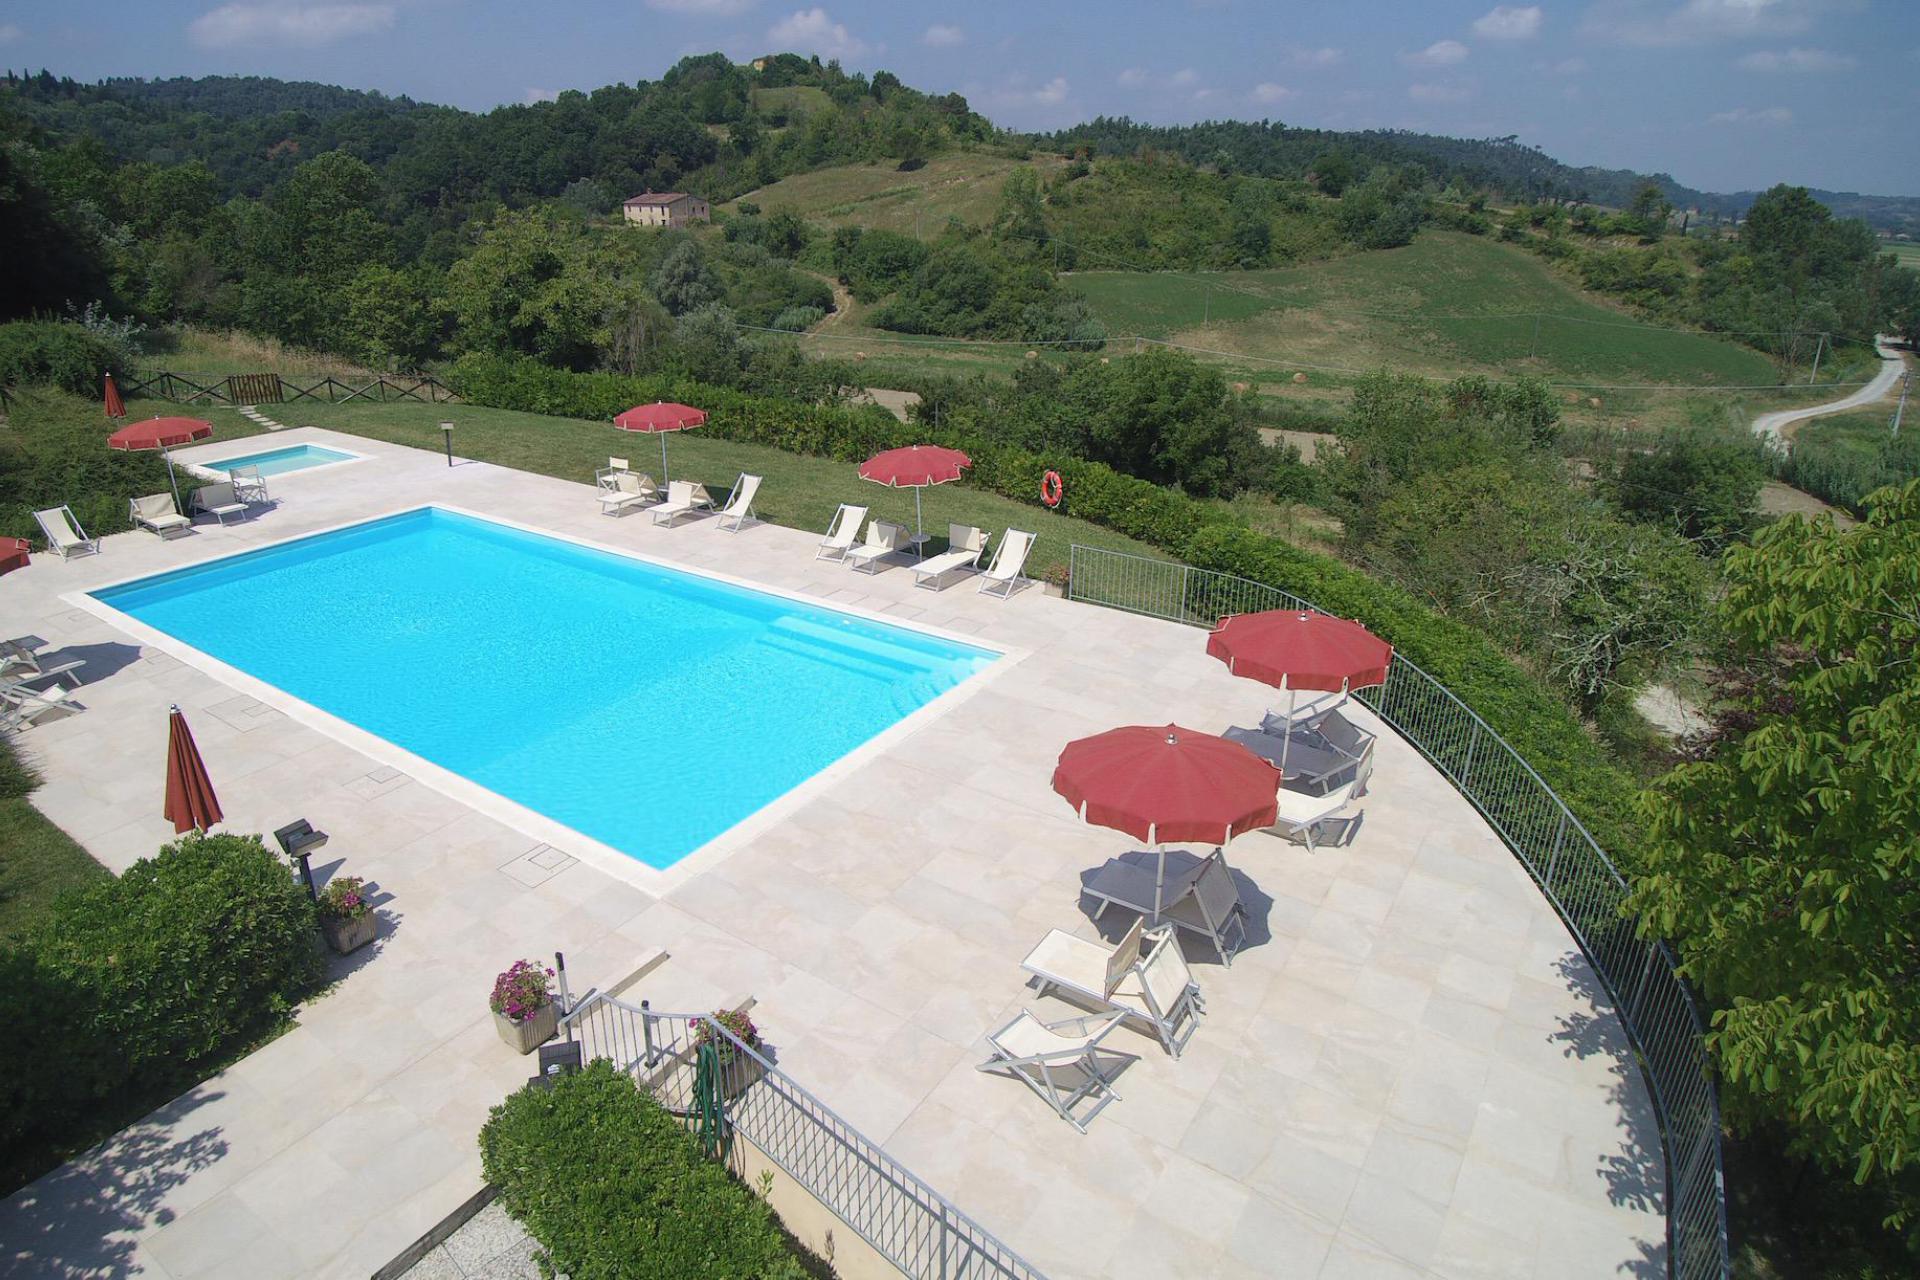 Nice agriturismo with fenced pool and toddlers' pool